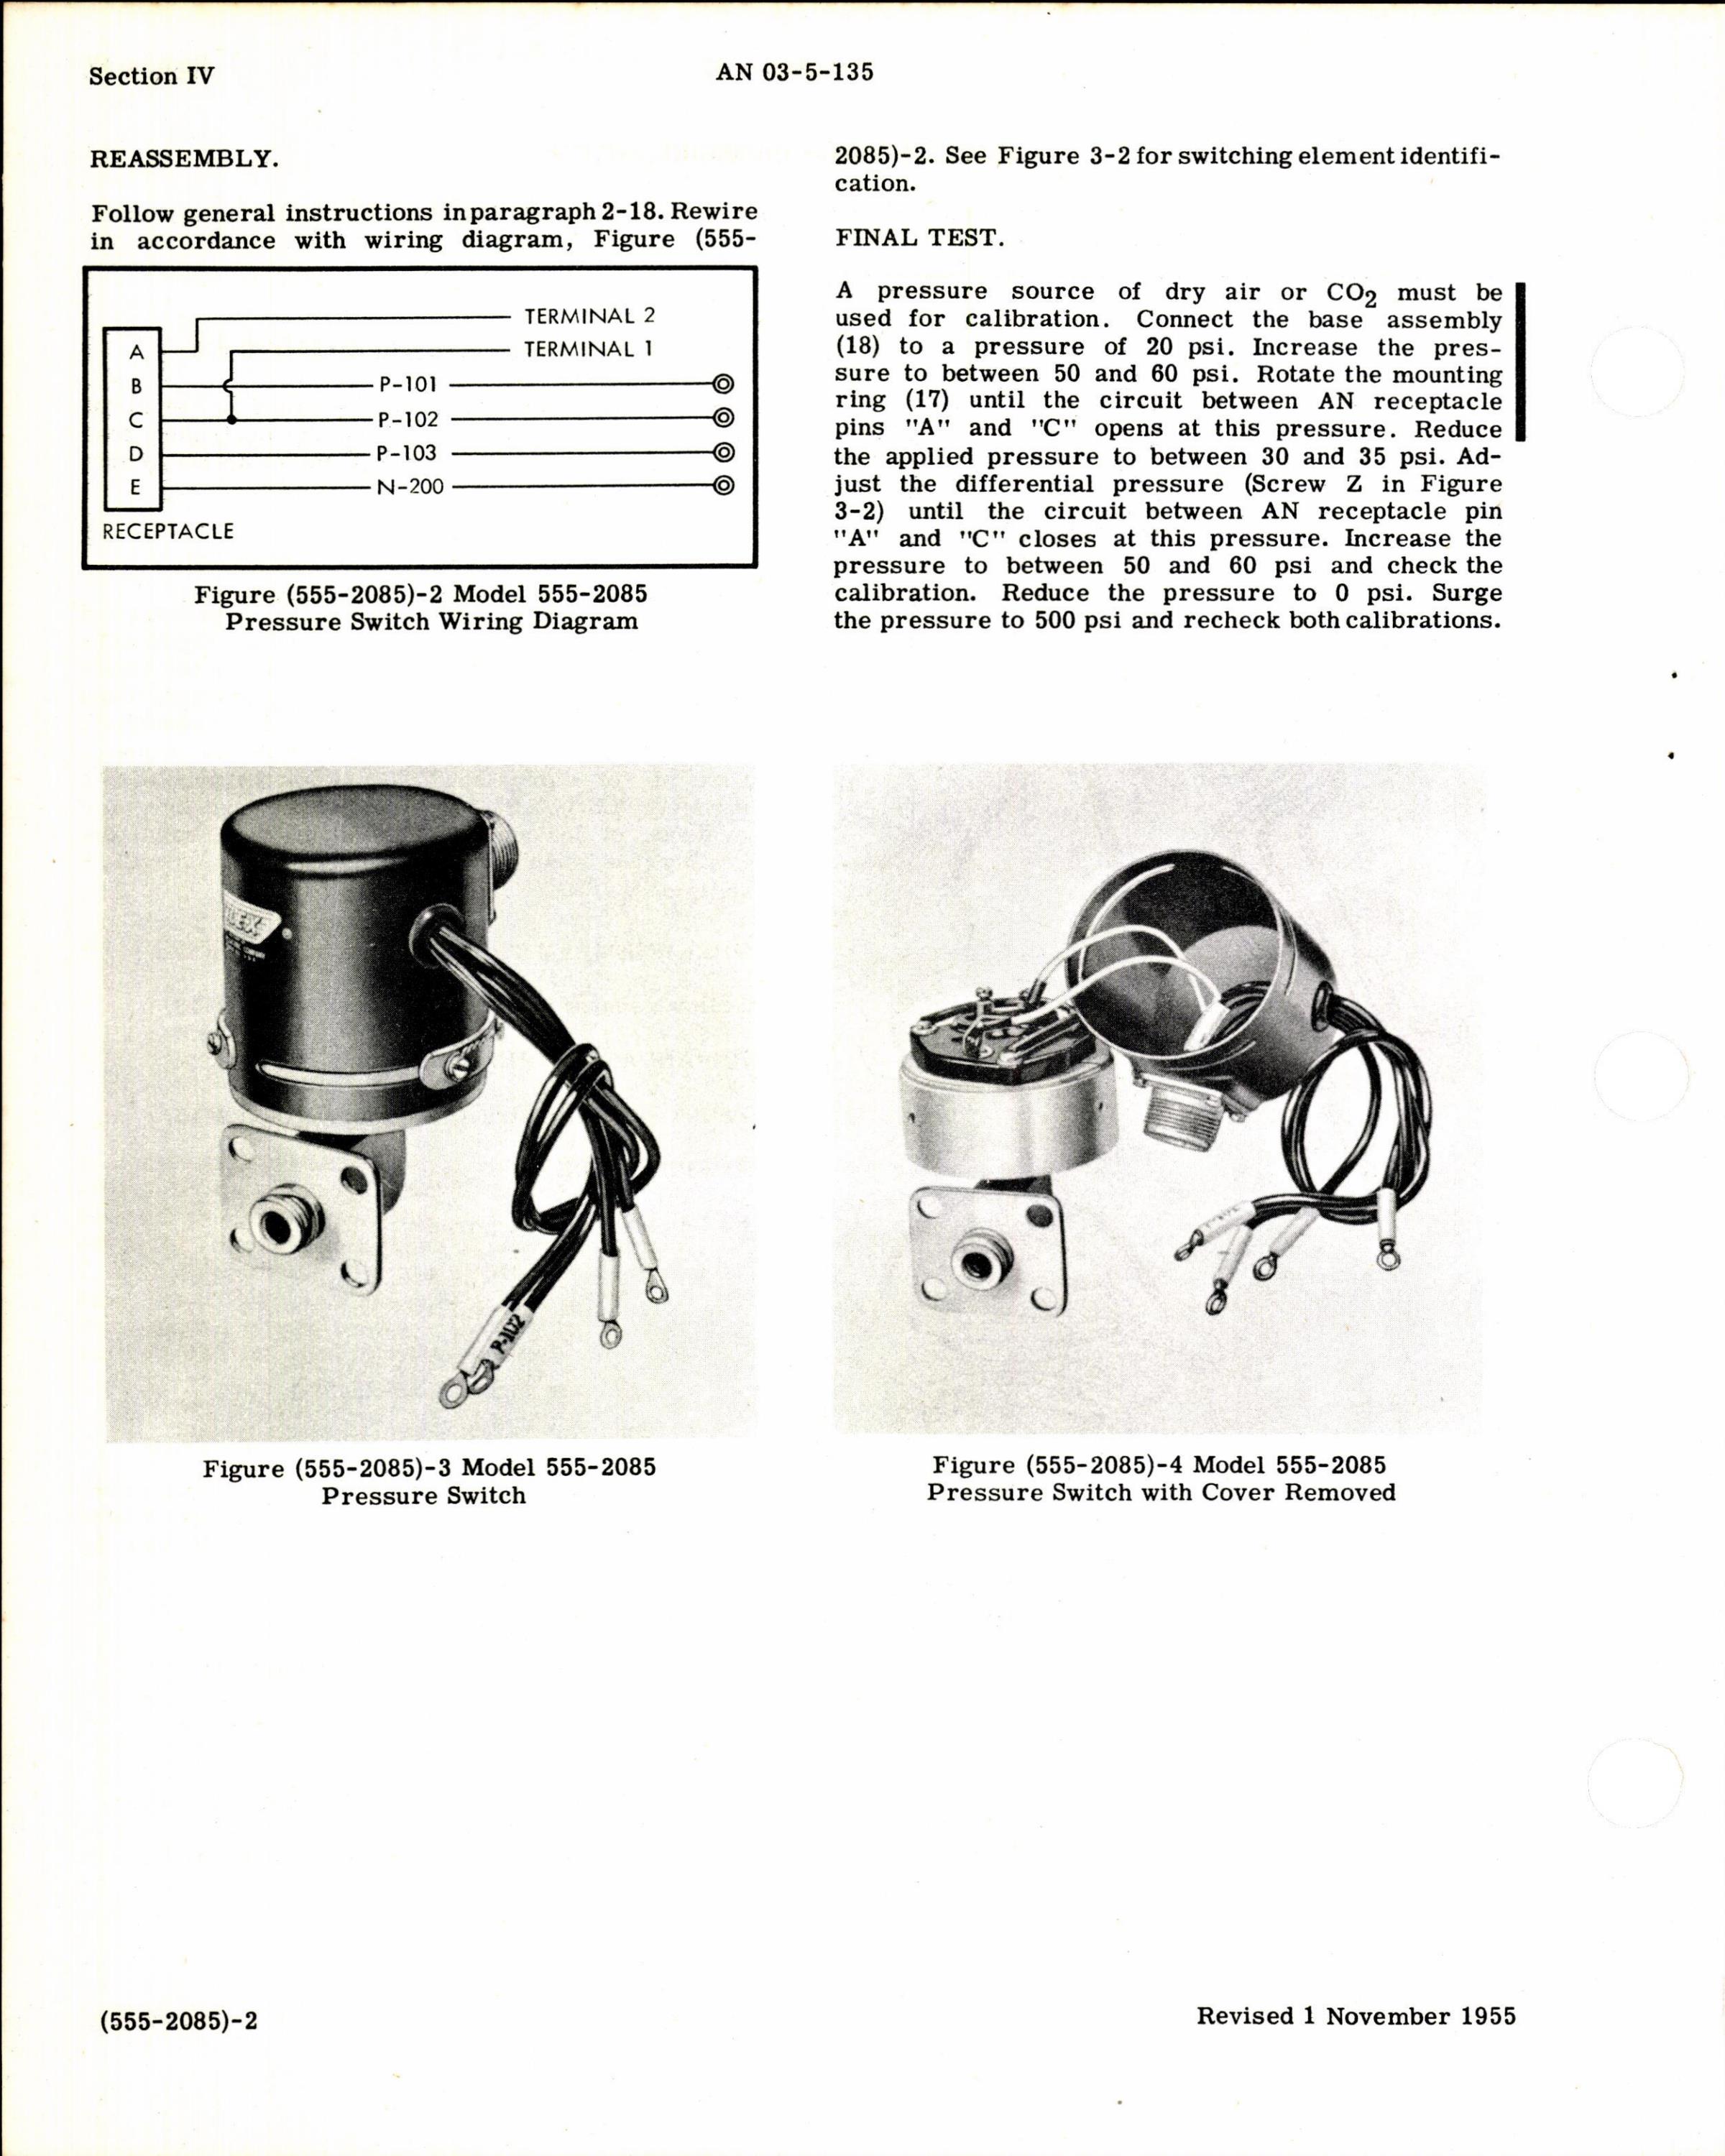 Sample page 6 from AirCorps Library document: Overhaul Instructions for Cook Pressure Control Switches